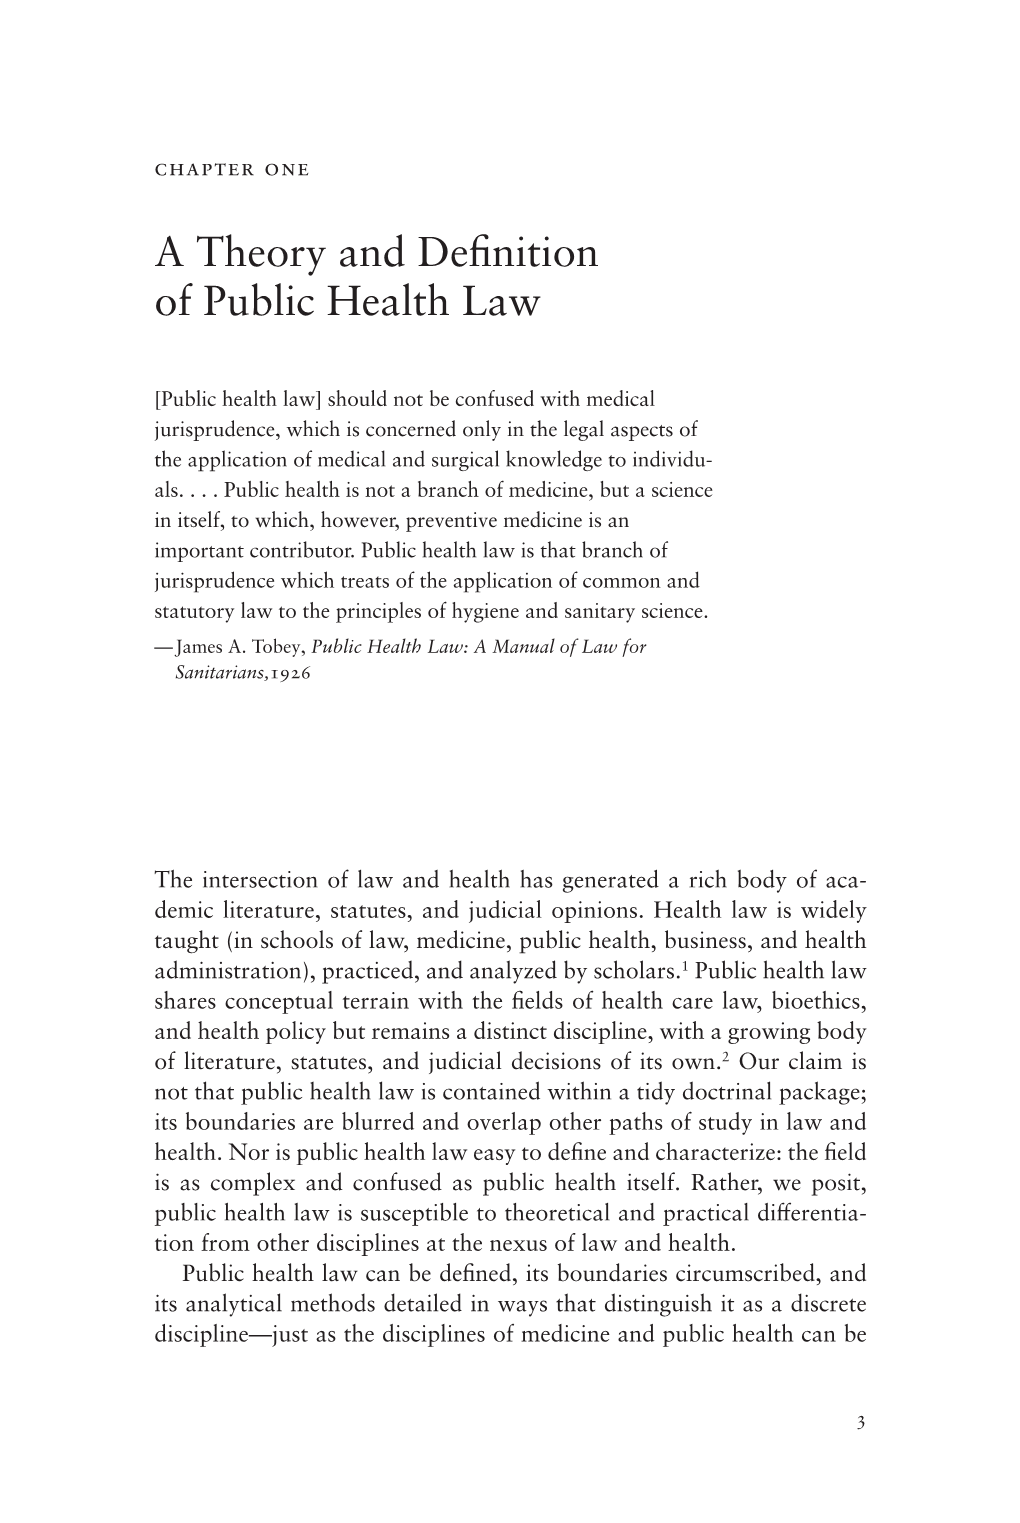 A Theory and Definition of Public Health Law